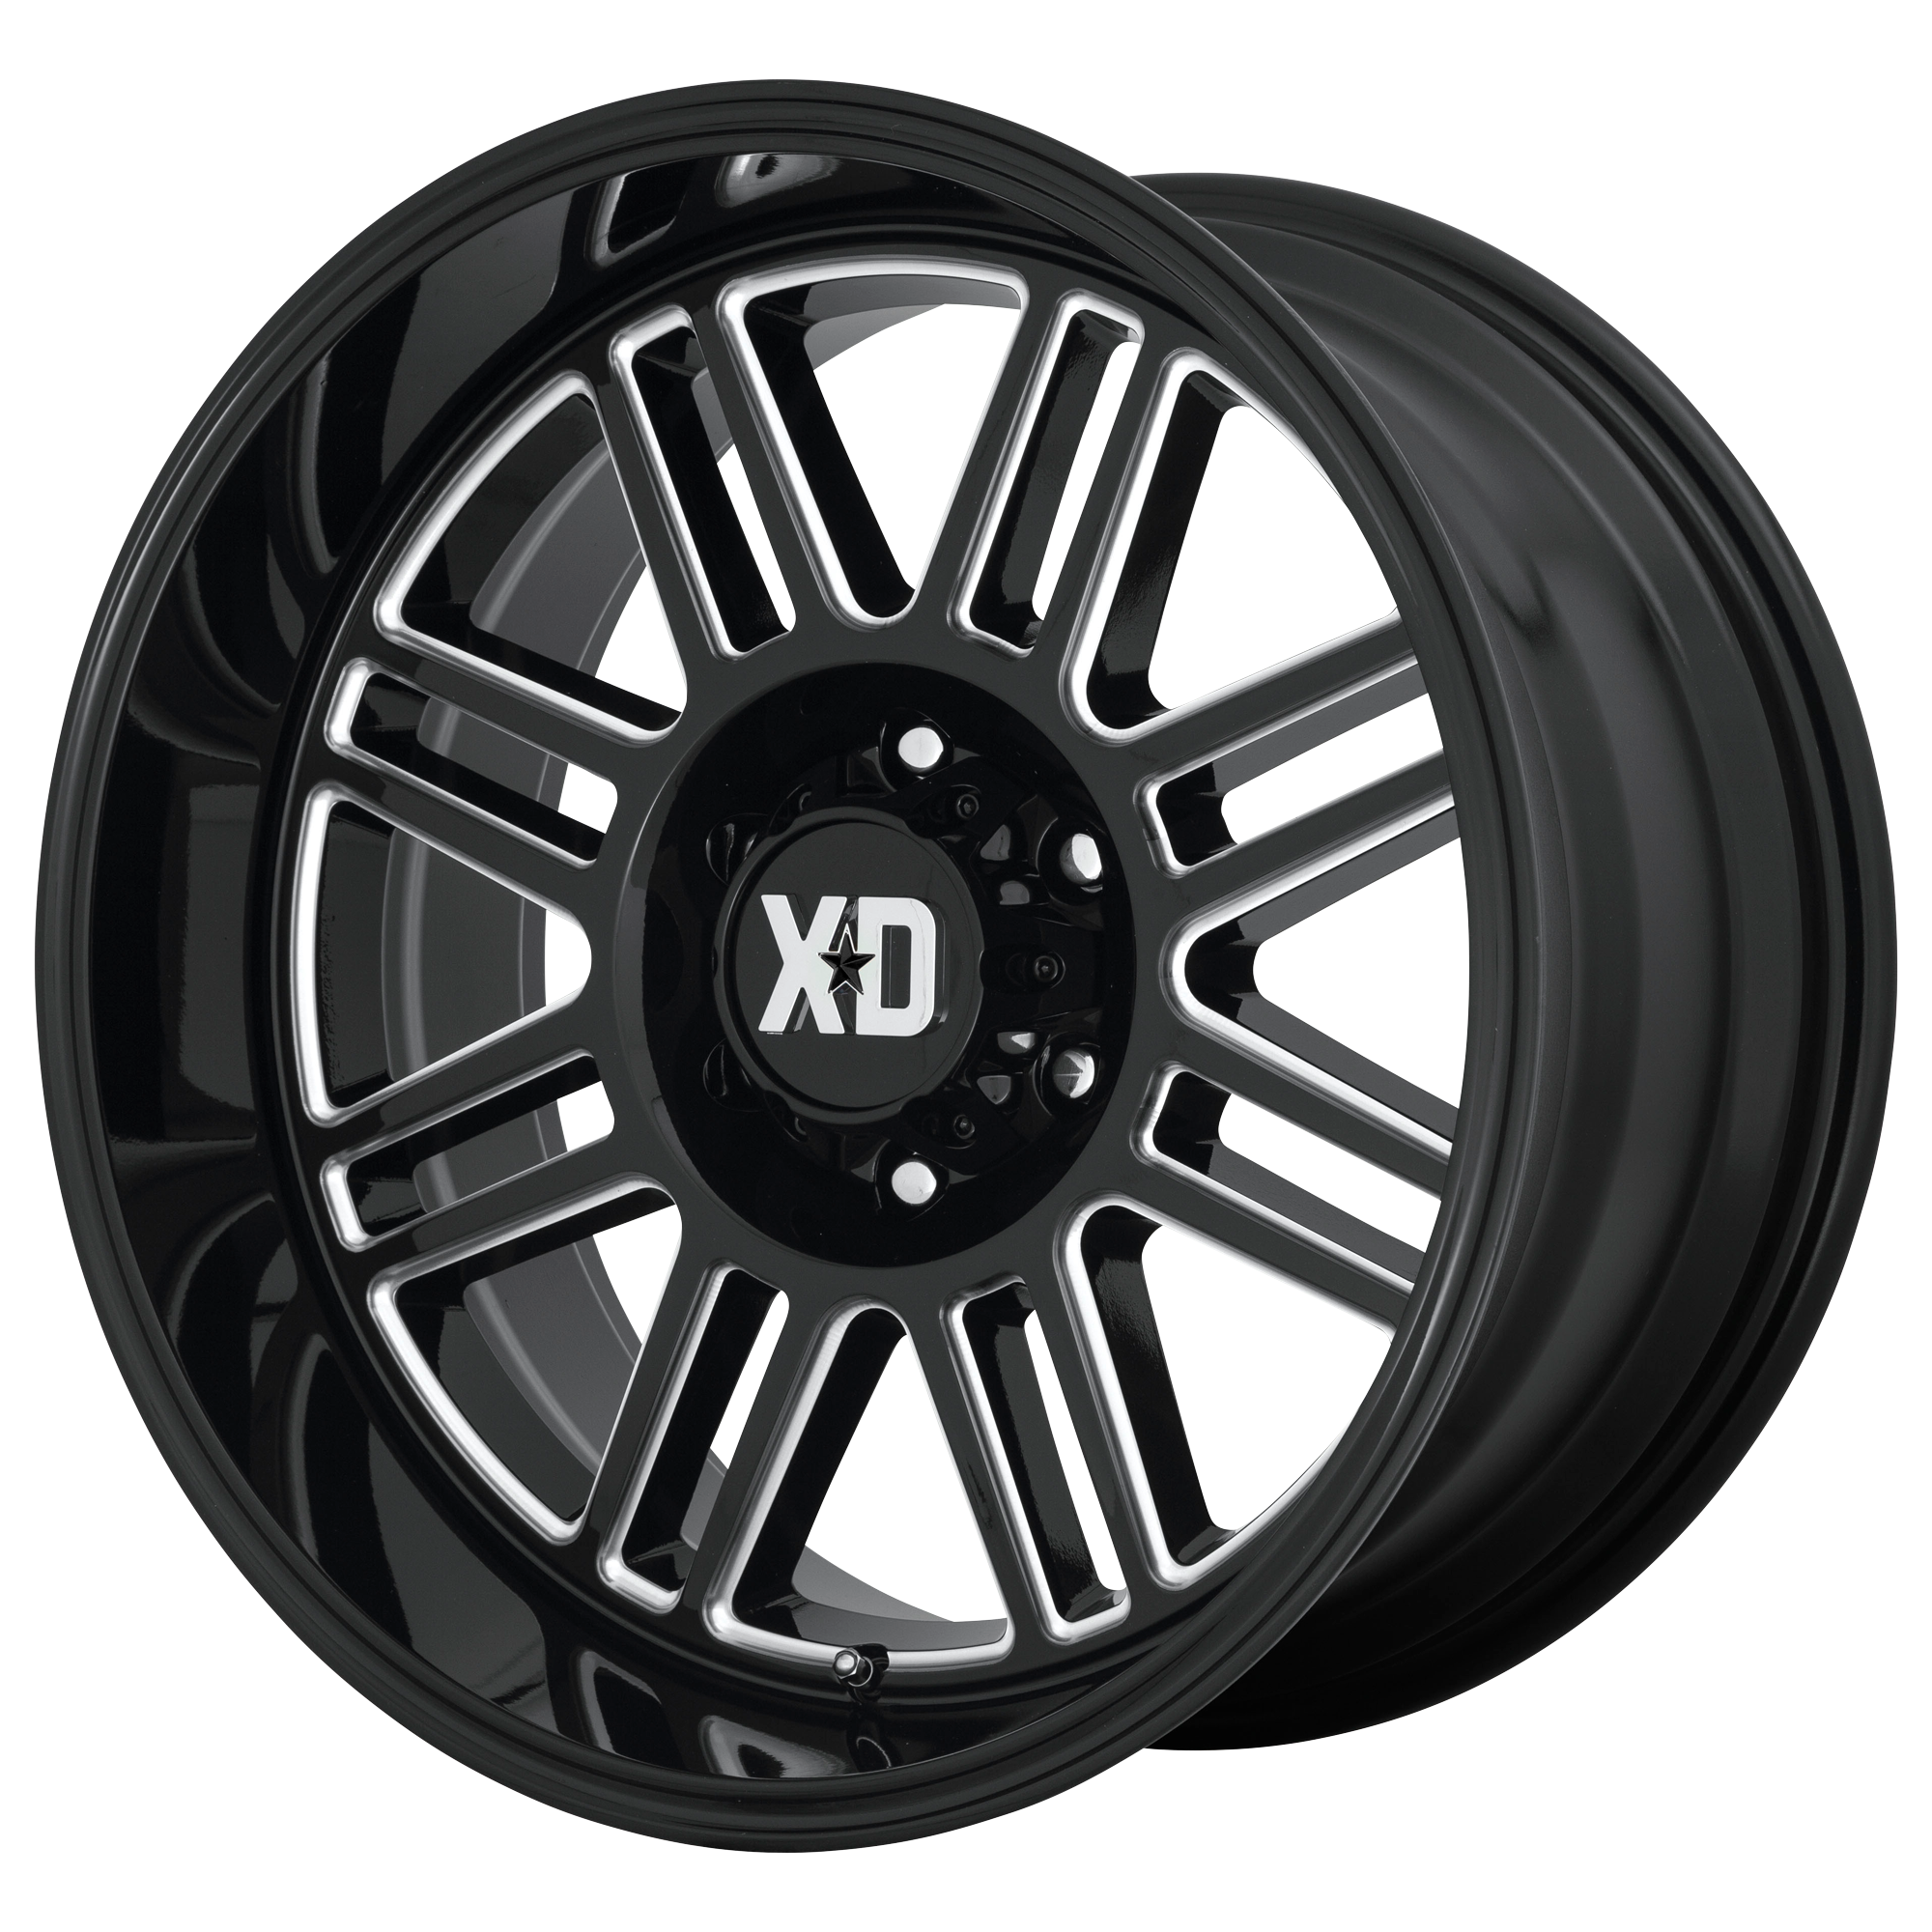 CAGE 20x9 6x139.70 GLOSS BLACK MILLED (18 mm) - Tires and Engine Performance